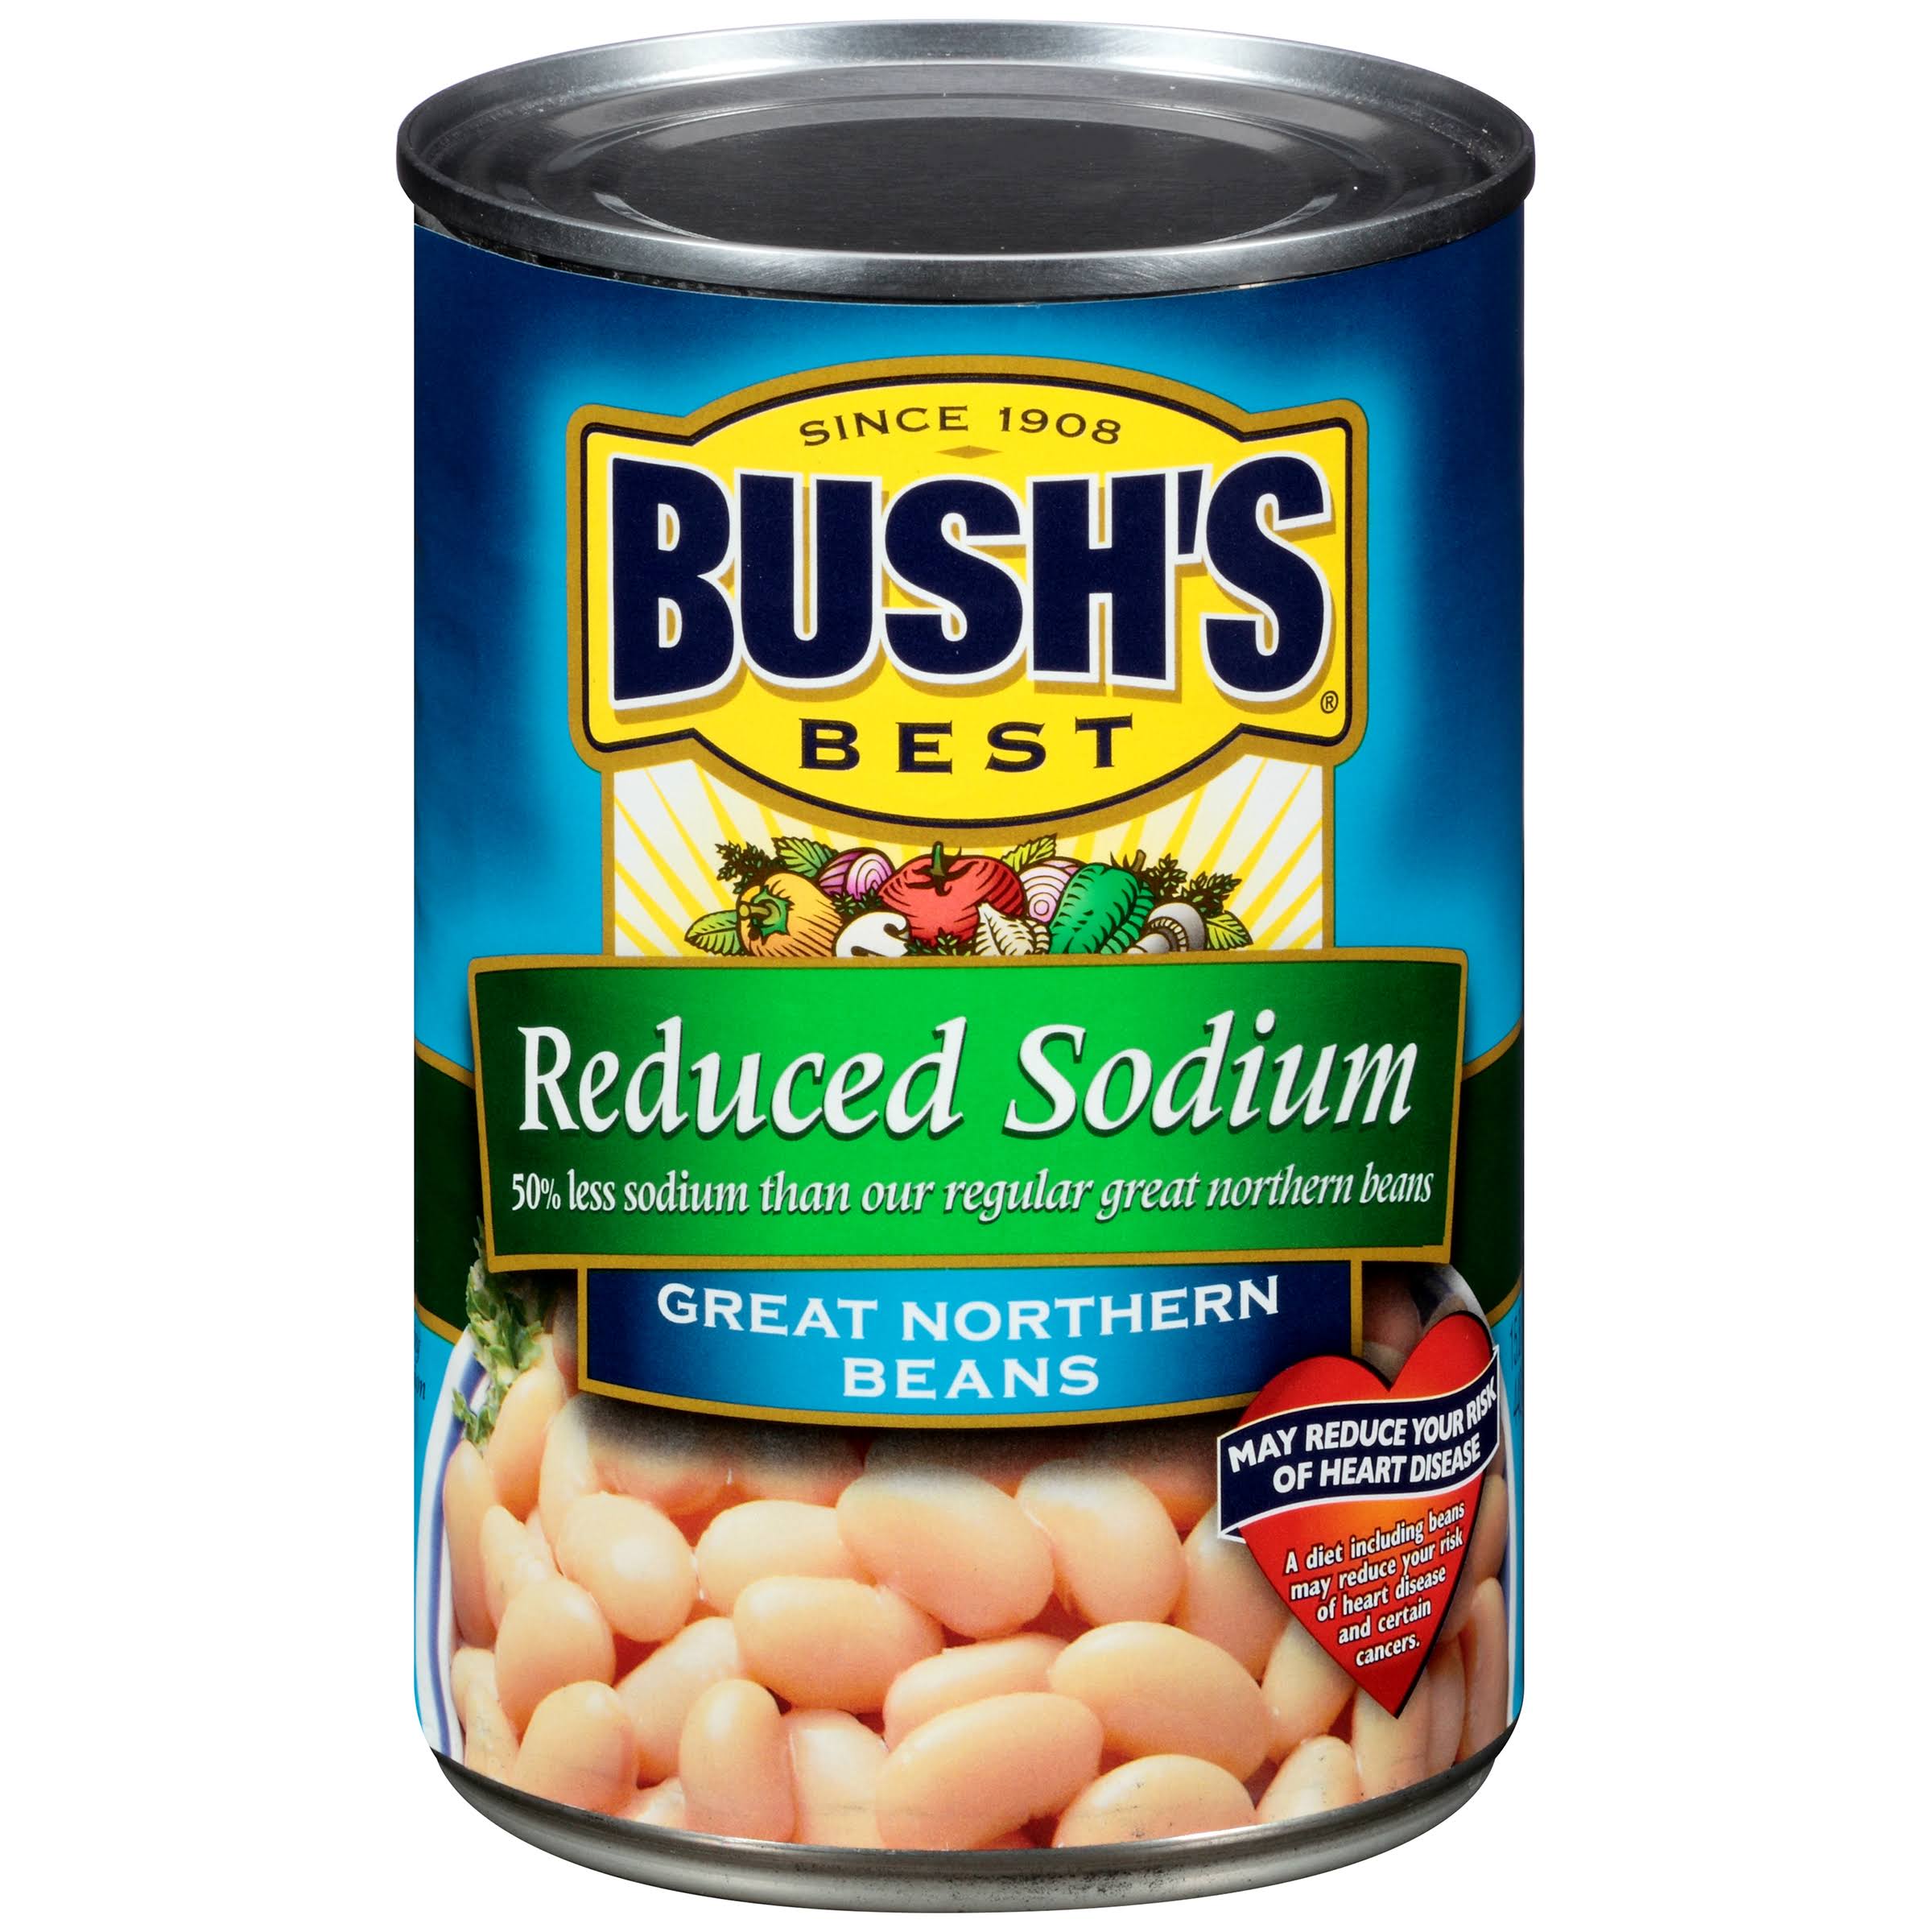 Bush's Reduced Sodium Great Northern Beans - 15.8oz